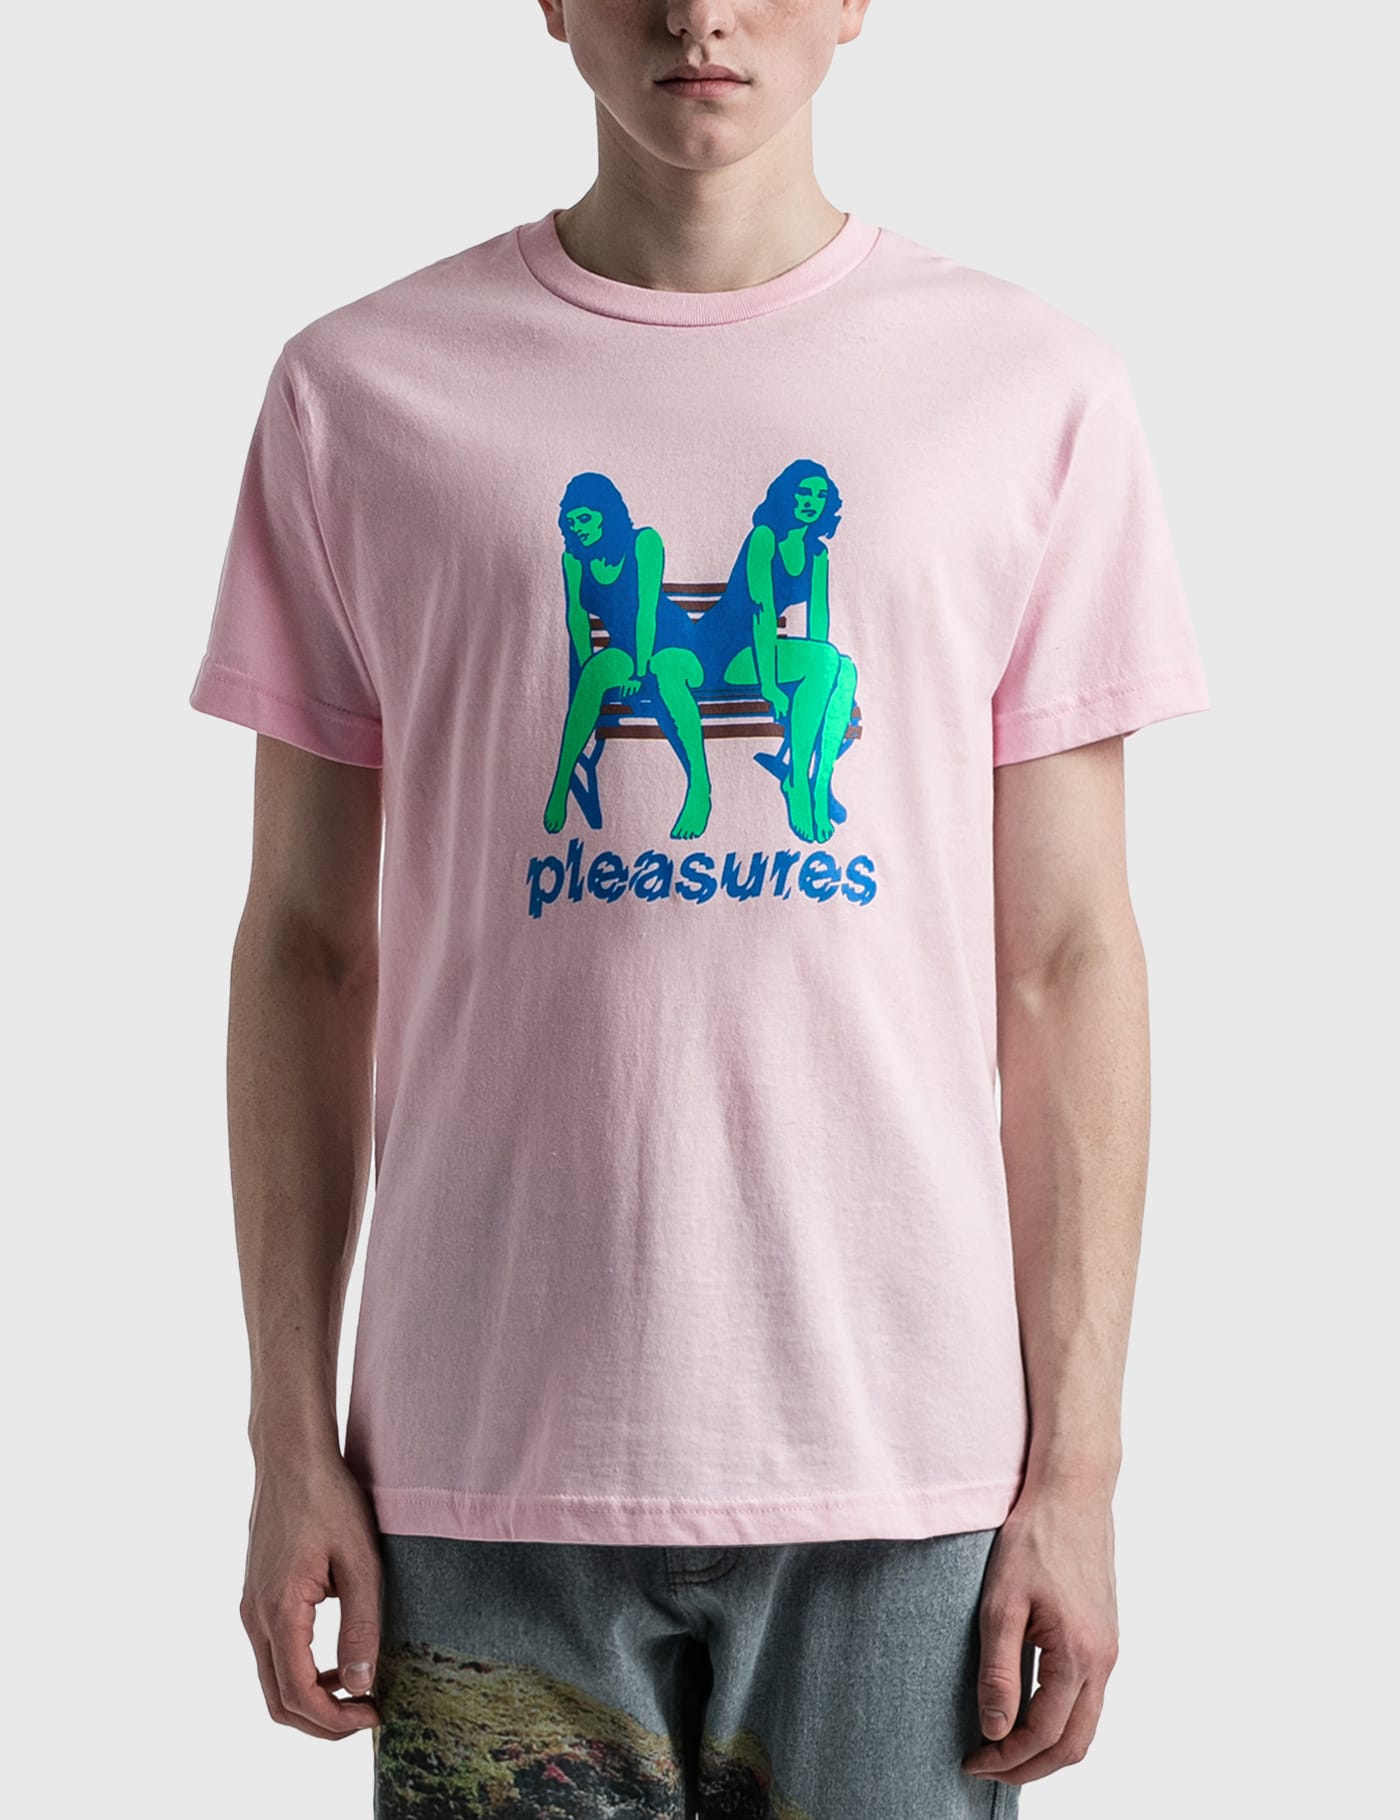 Pleasures | HBX - Globally Curated Fashion and Lifestyle by Hypebeast